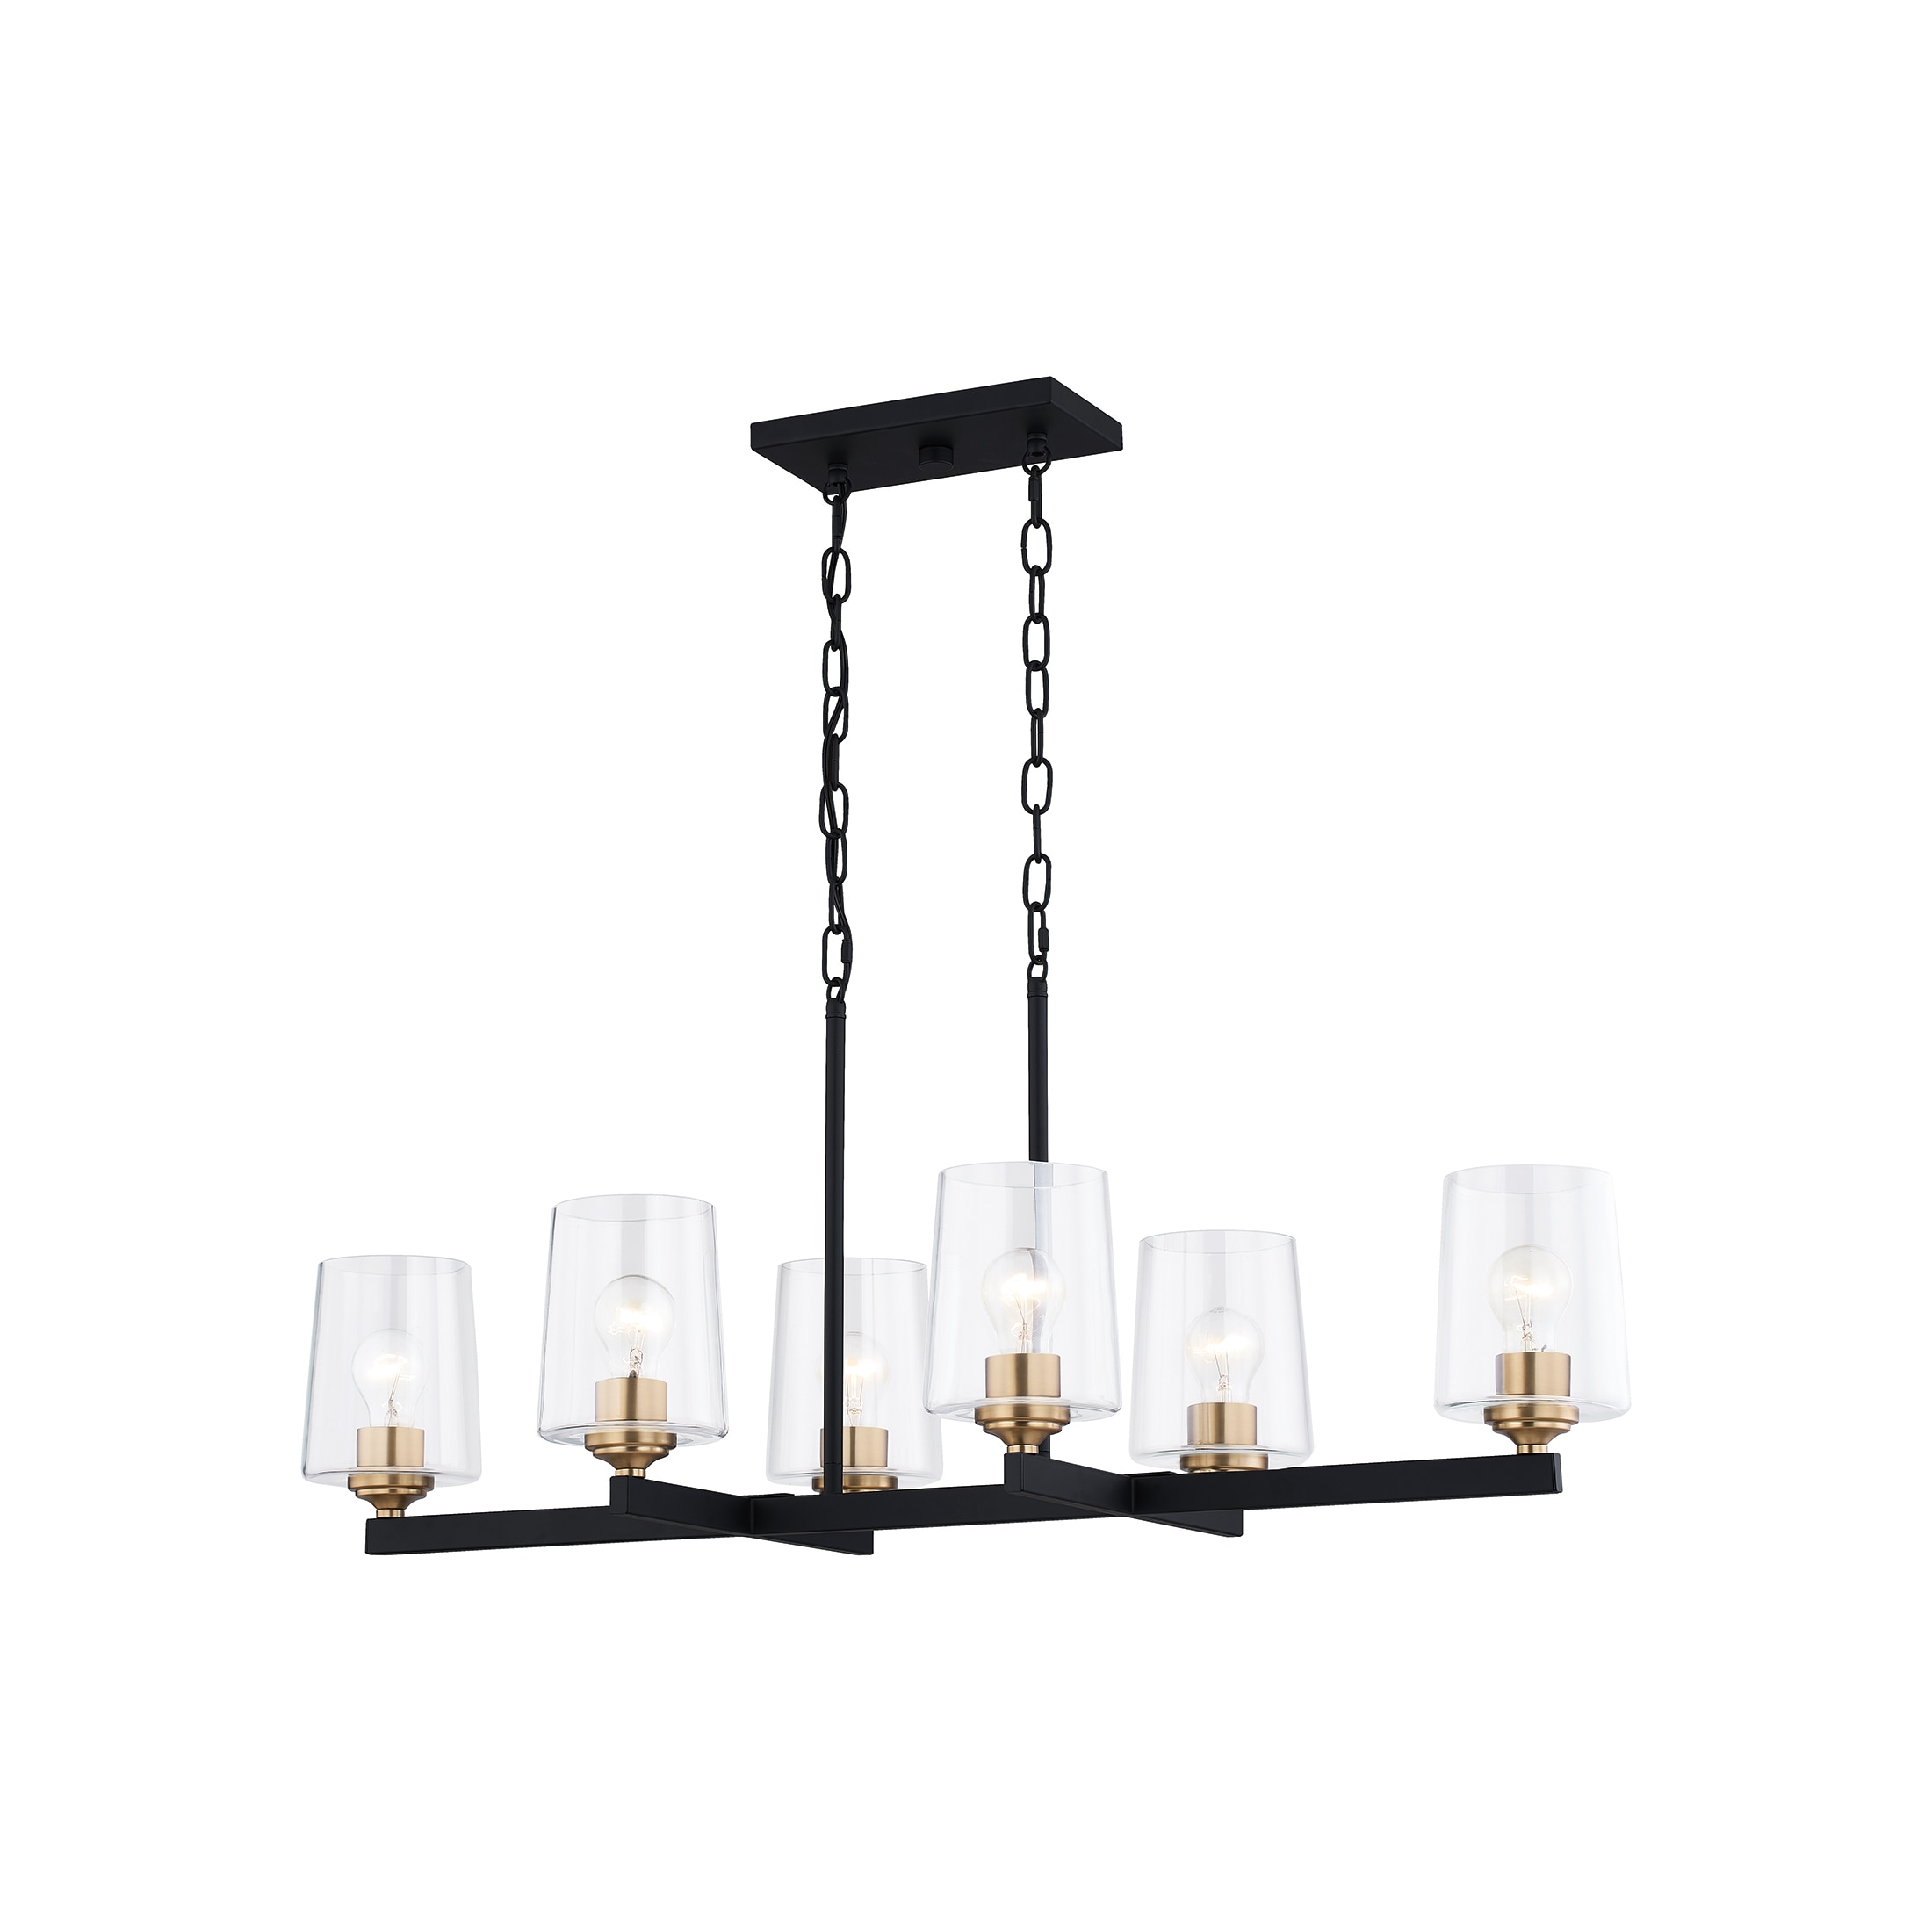 Quoizel Whitlock 6-Light Matte Black and Brushed Weathered Brass